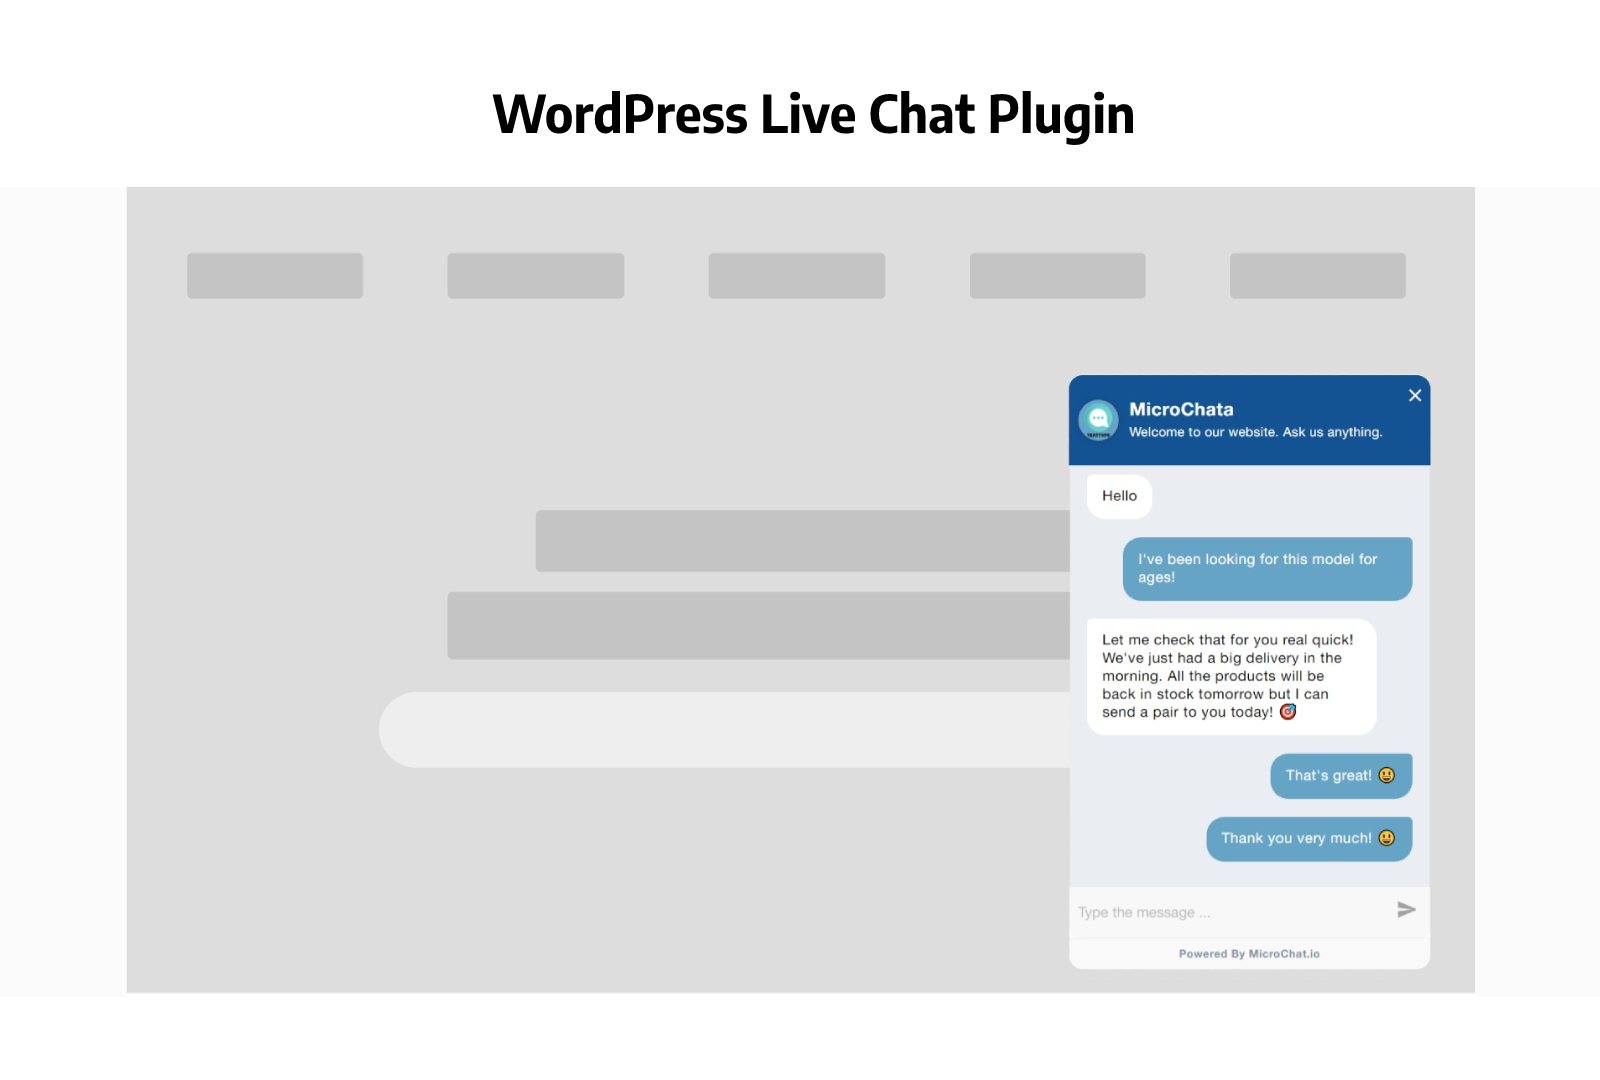 Allow your website visitors to contact you at any time with the WordPress Live Chat Plugin.